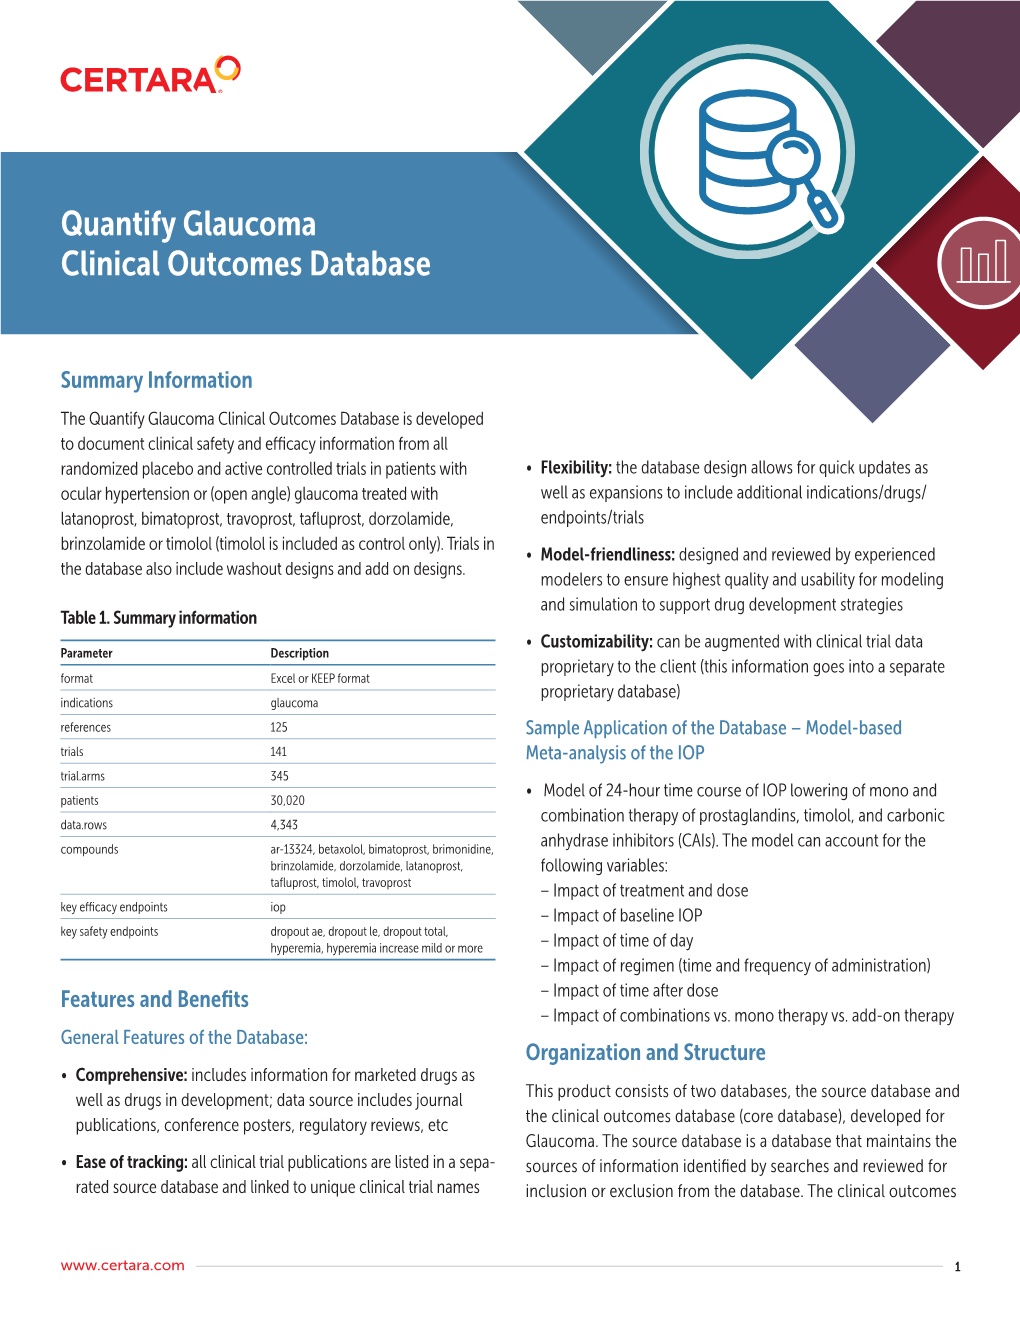 Quantify Glaucoma Clinical Outcomes Database